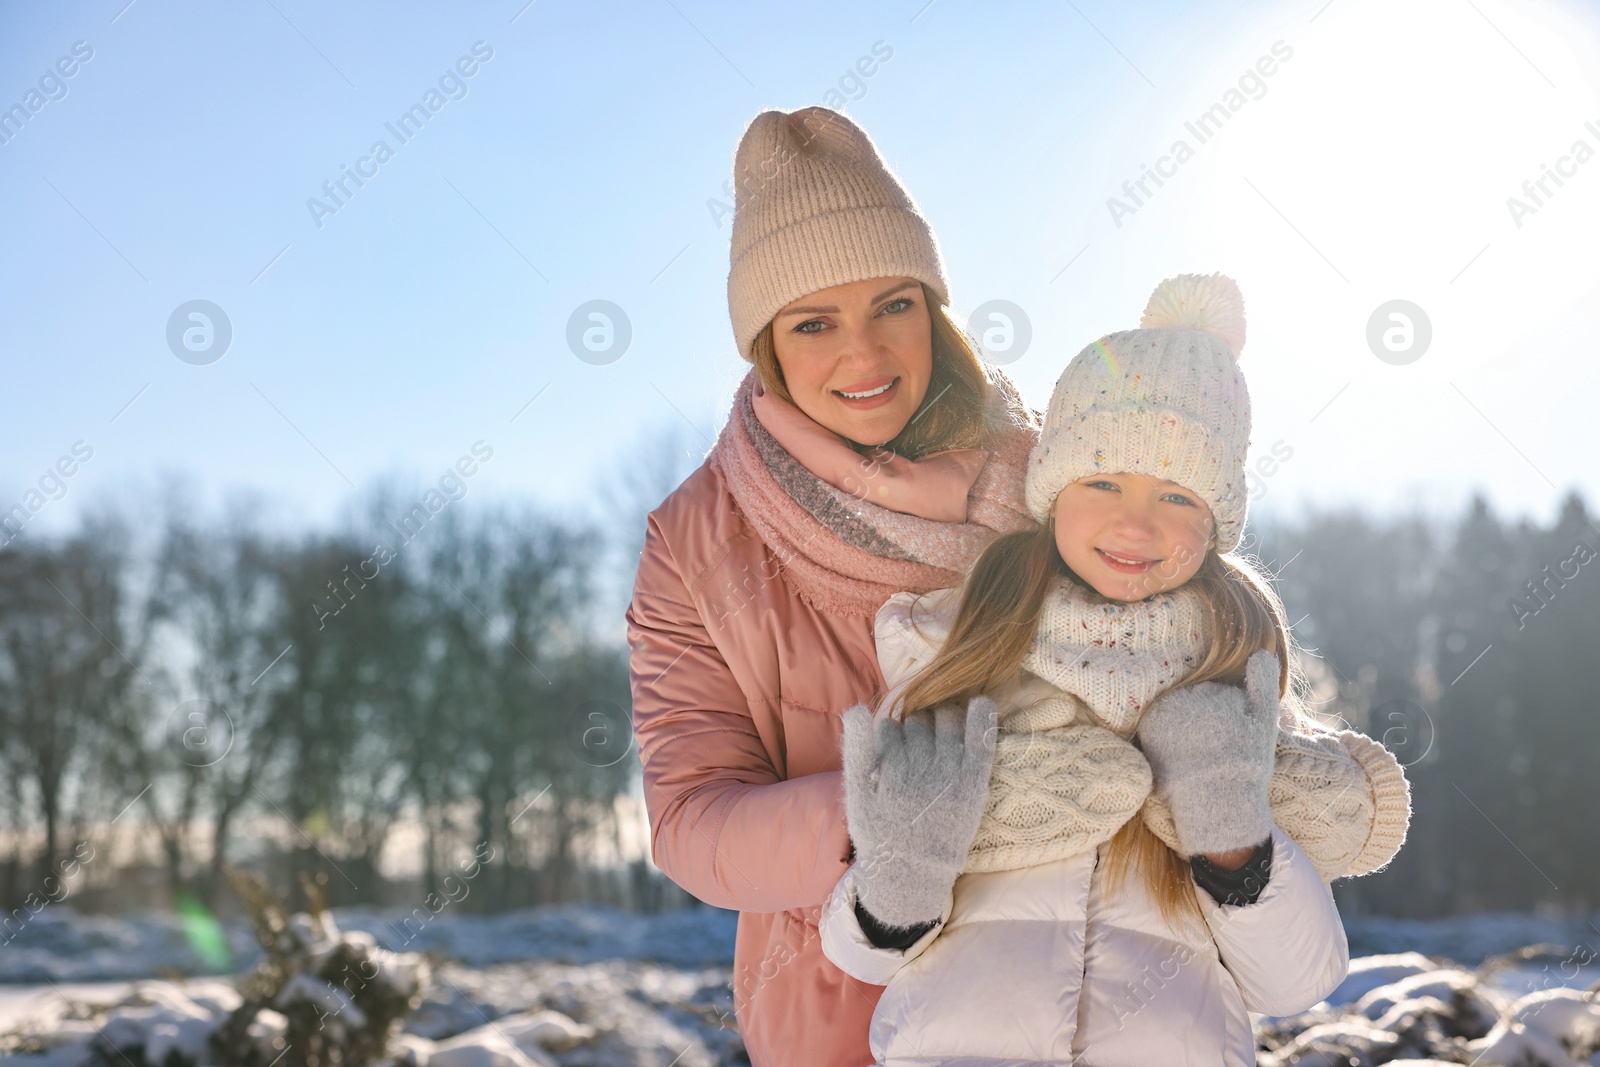 Photo of Family portrait of happy mother and her daughter in sunny snowy park. Space for text